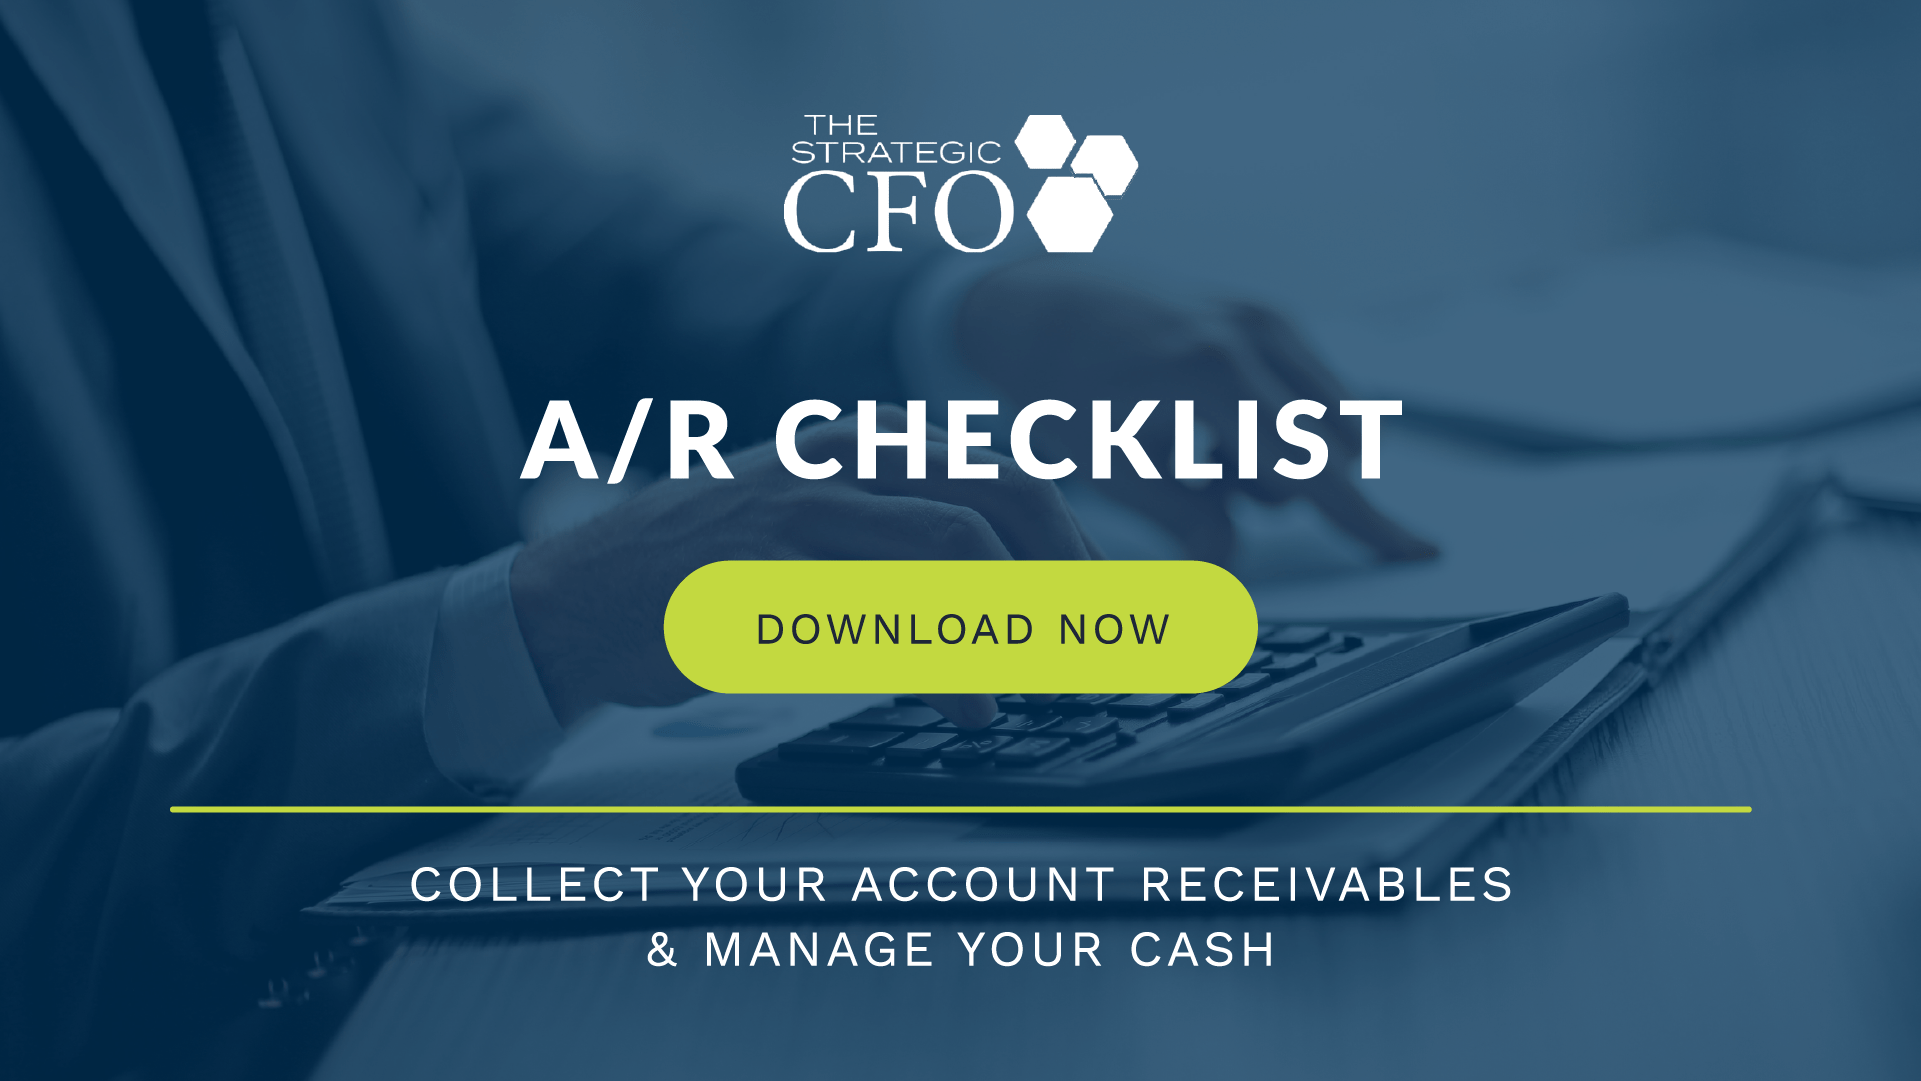 collect accounts receivable